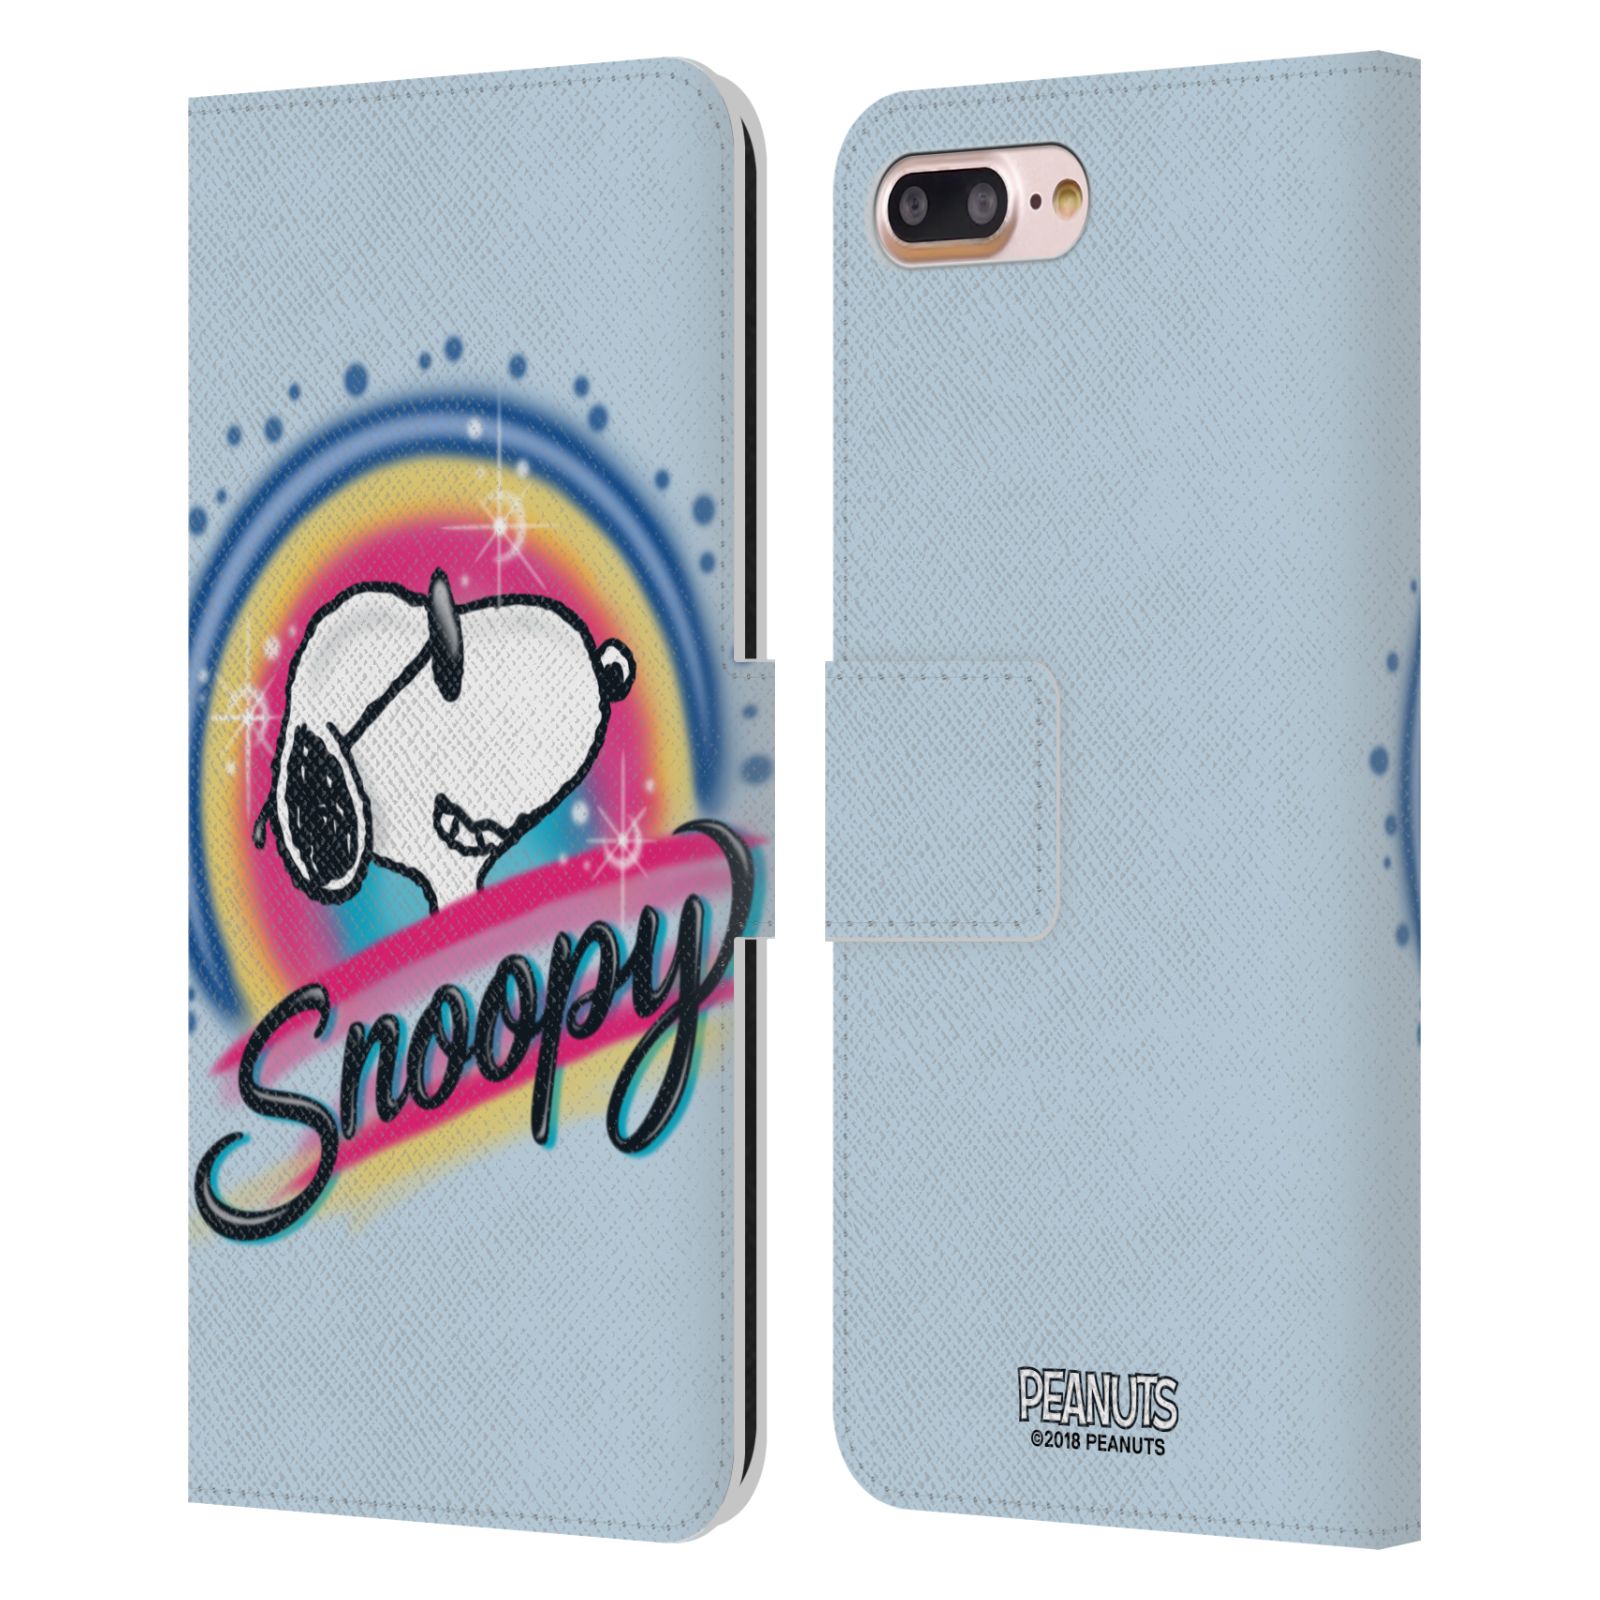 Pouzdro na mobil Apple Iphone 7+/8+ - HEAD CASE - Peanuts Snoopy Superstar 2